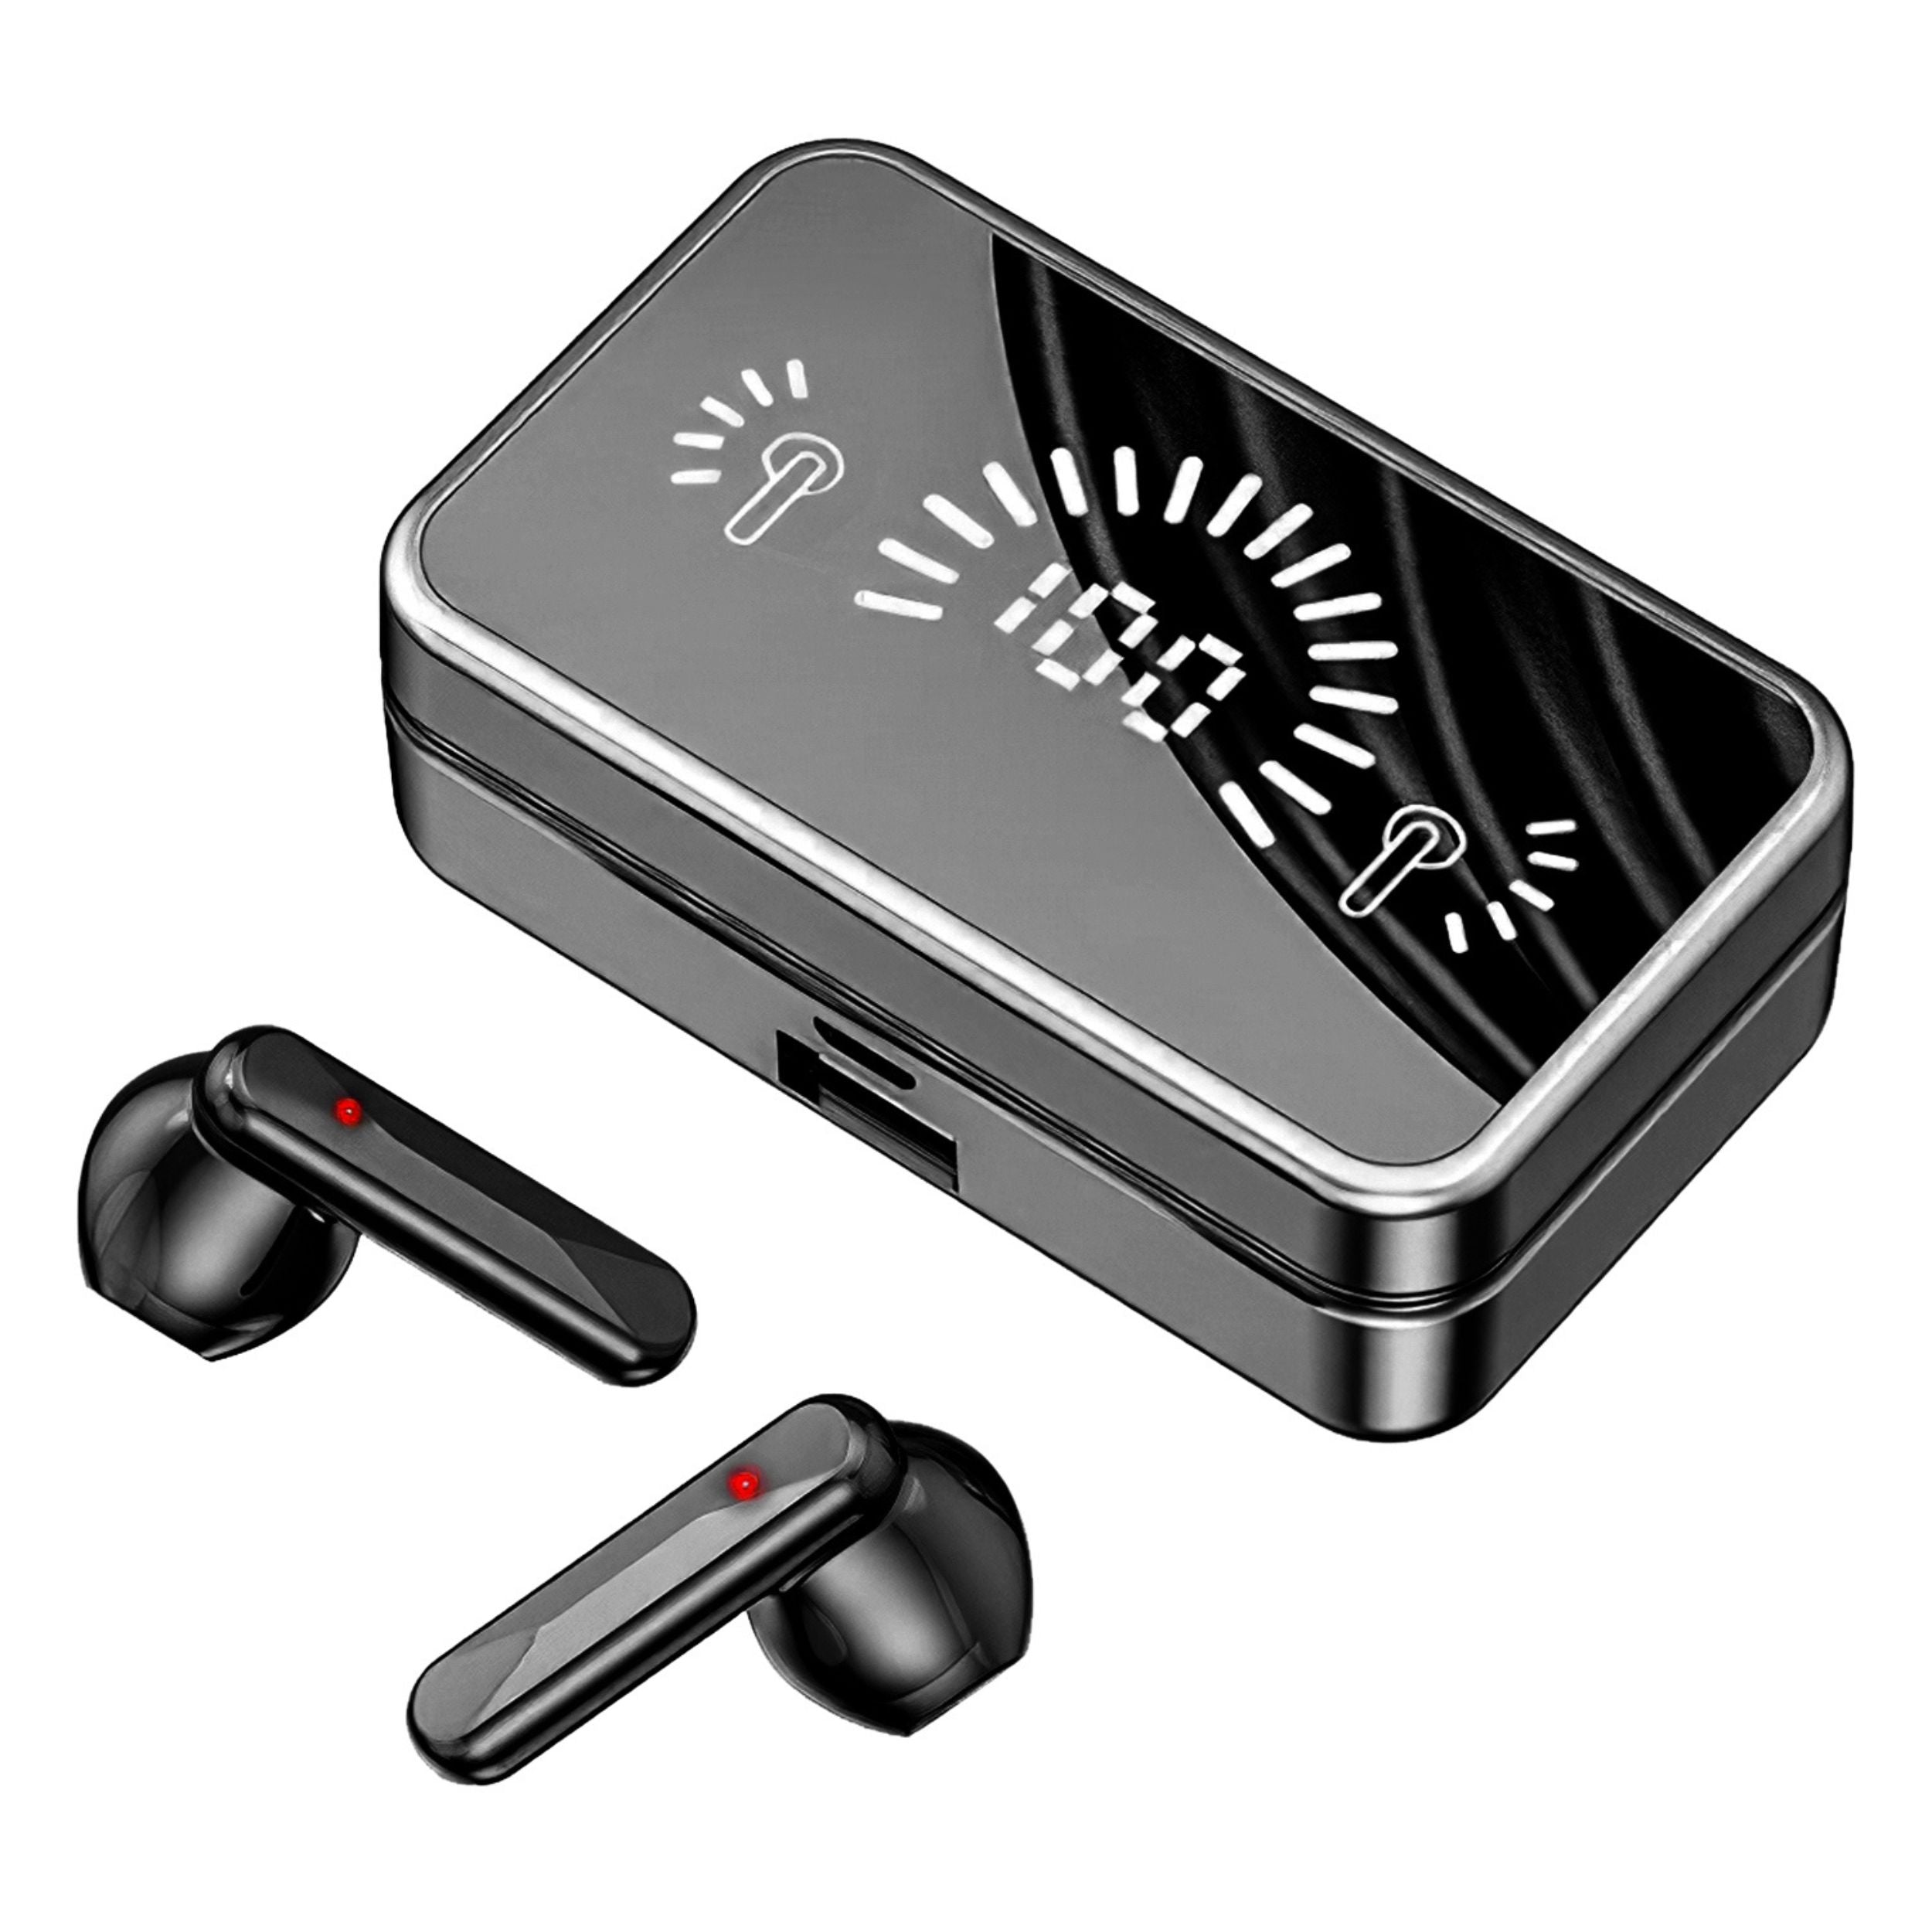 title:5.3 TWS Wireless Earbuds with Touch Control, In-Ear Headphones, Charging Case, Built-in Mic;color:Black